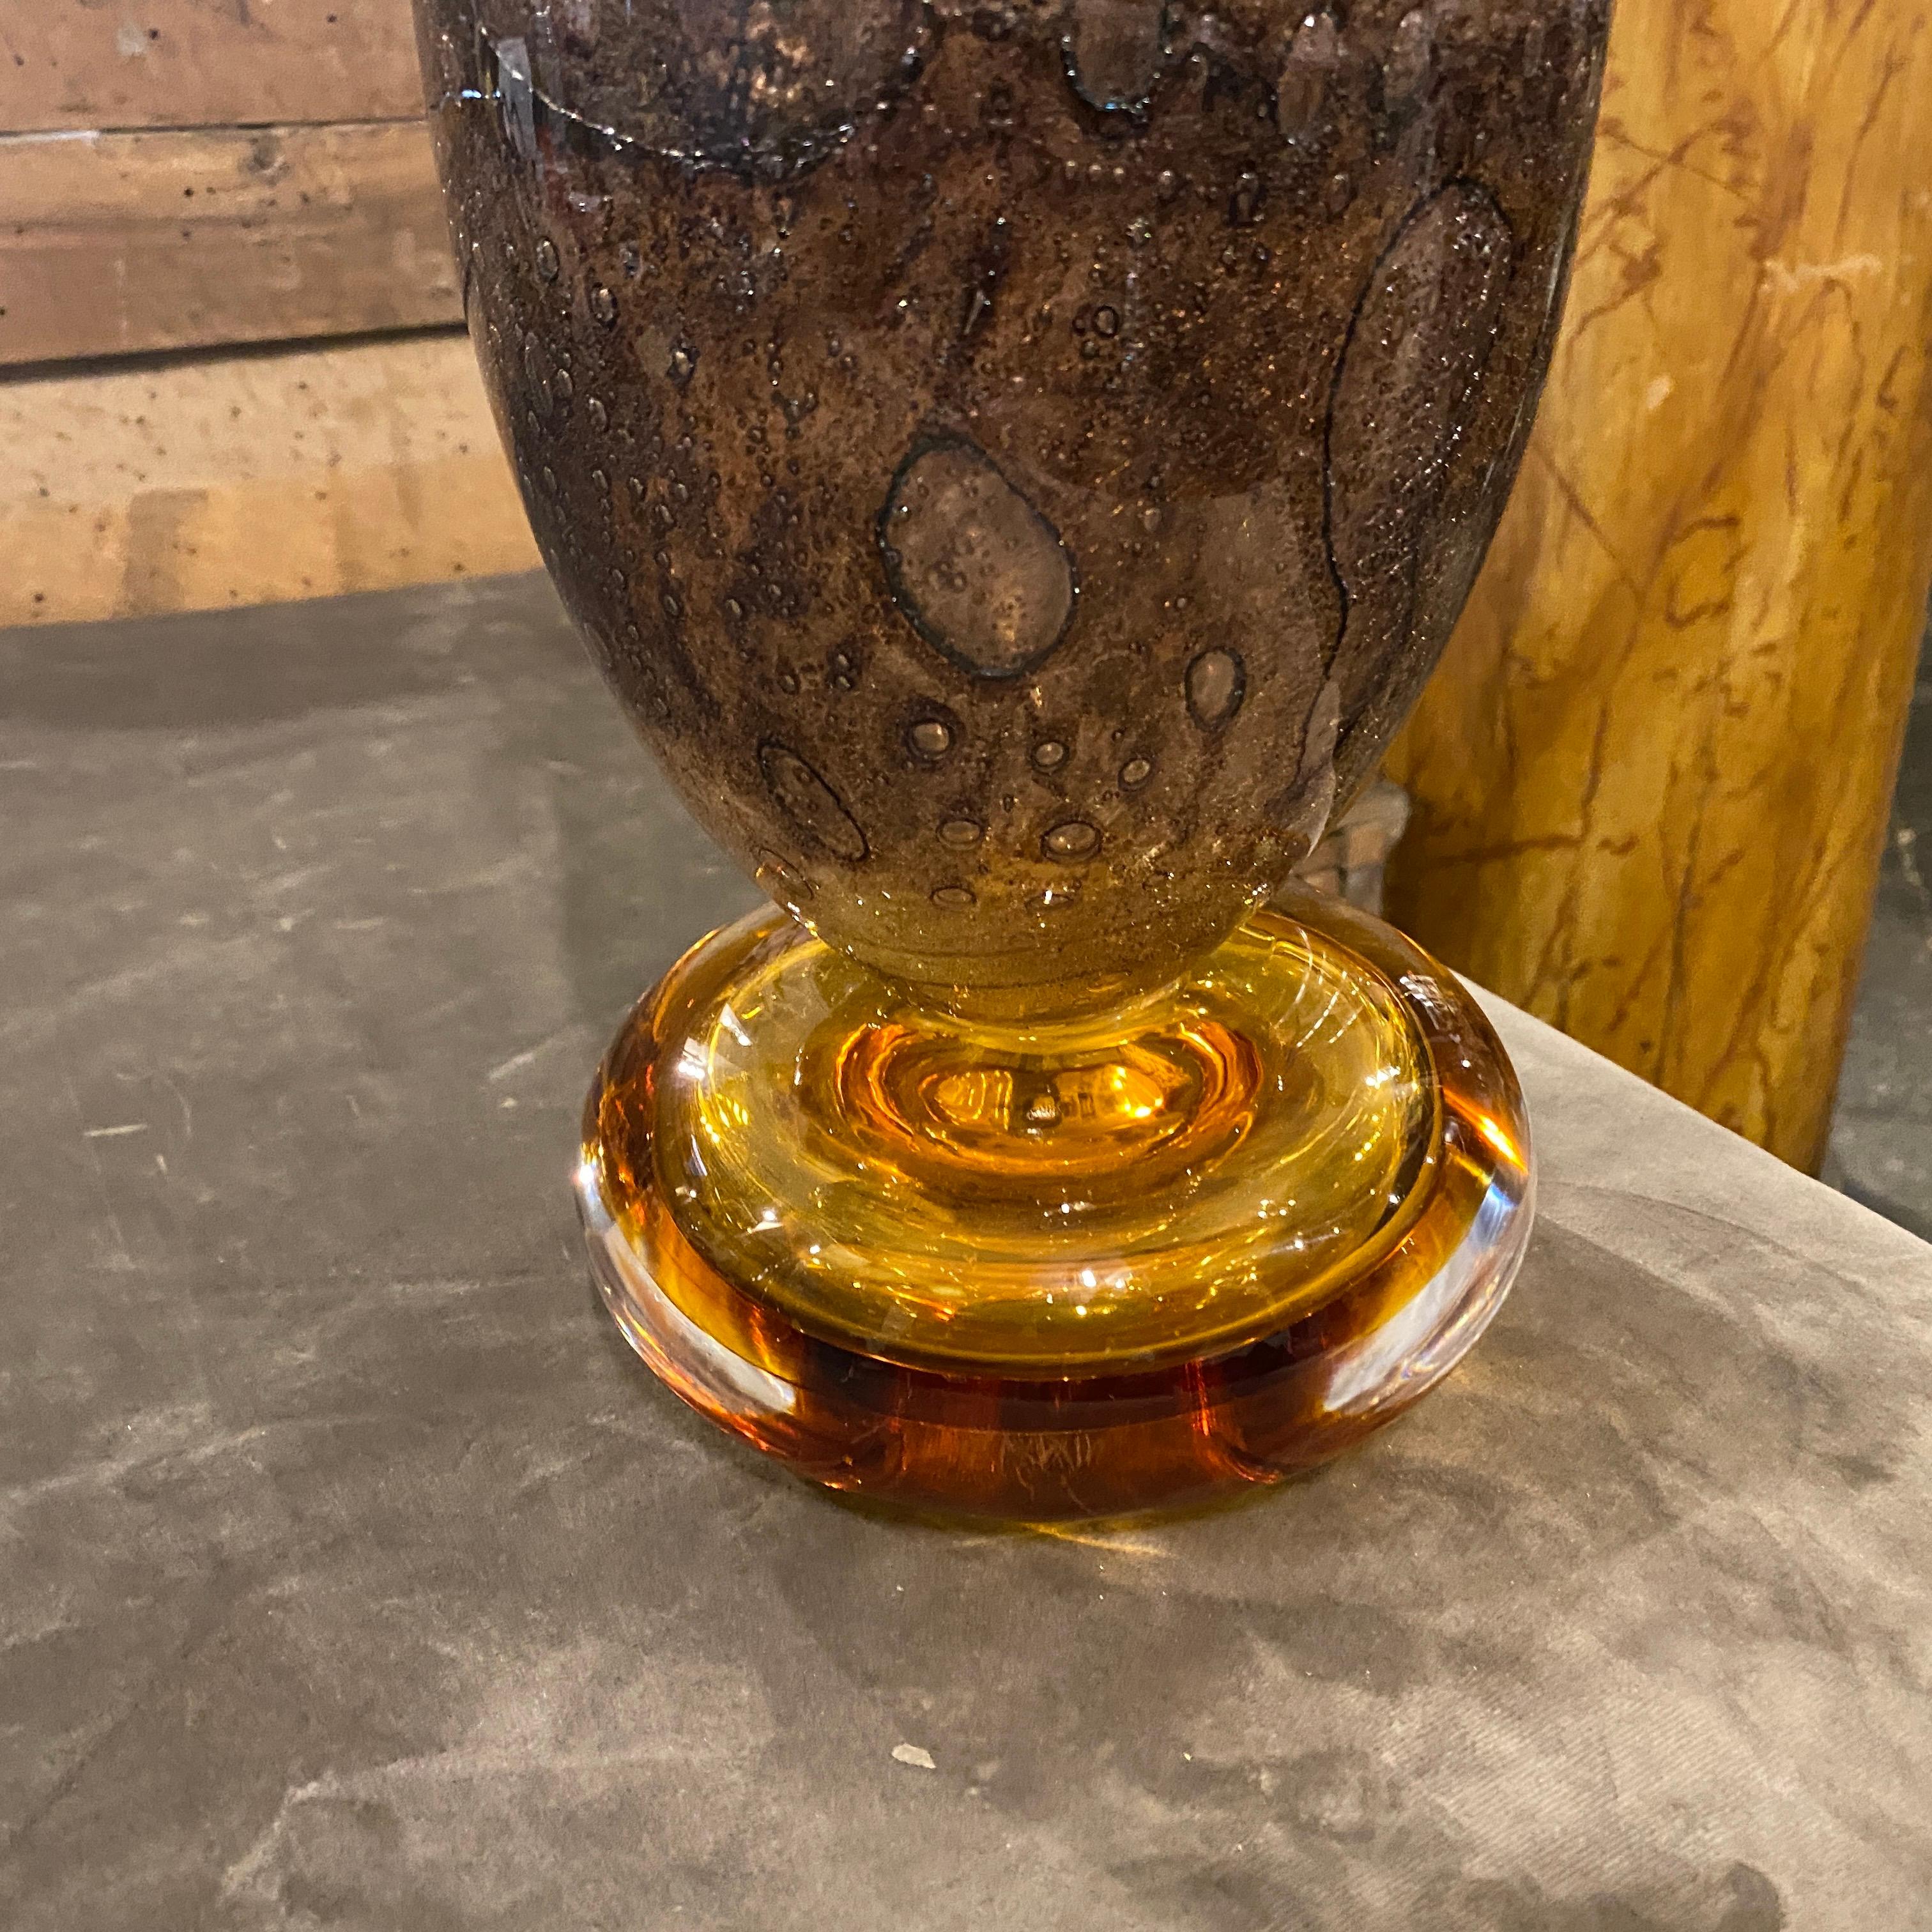 An extremely rare vase designed and manufactured in Murano by Giovanni Cenedese. Its acid signed on a side, brown and amber bubble murano glass  it's in very good conditions. The Vase is a striking example of Italian glassmaking mastery and